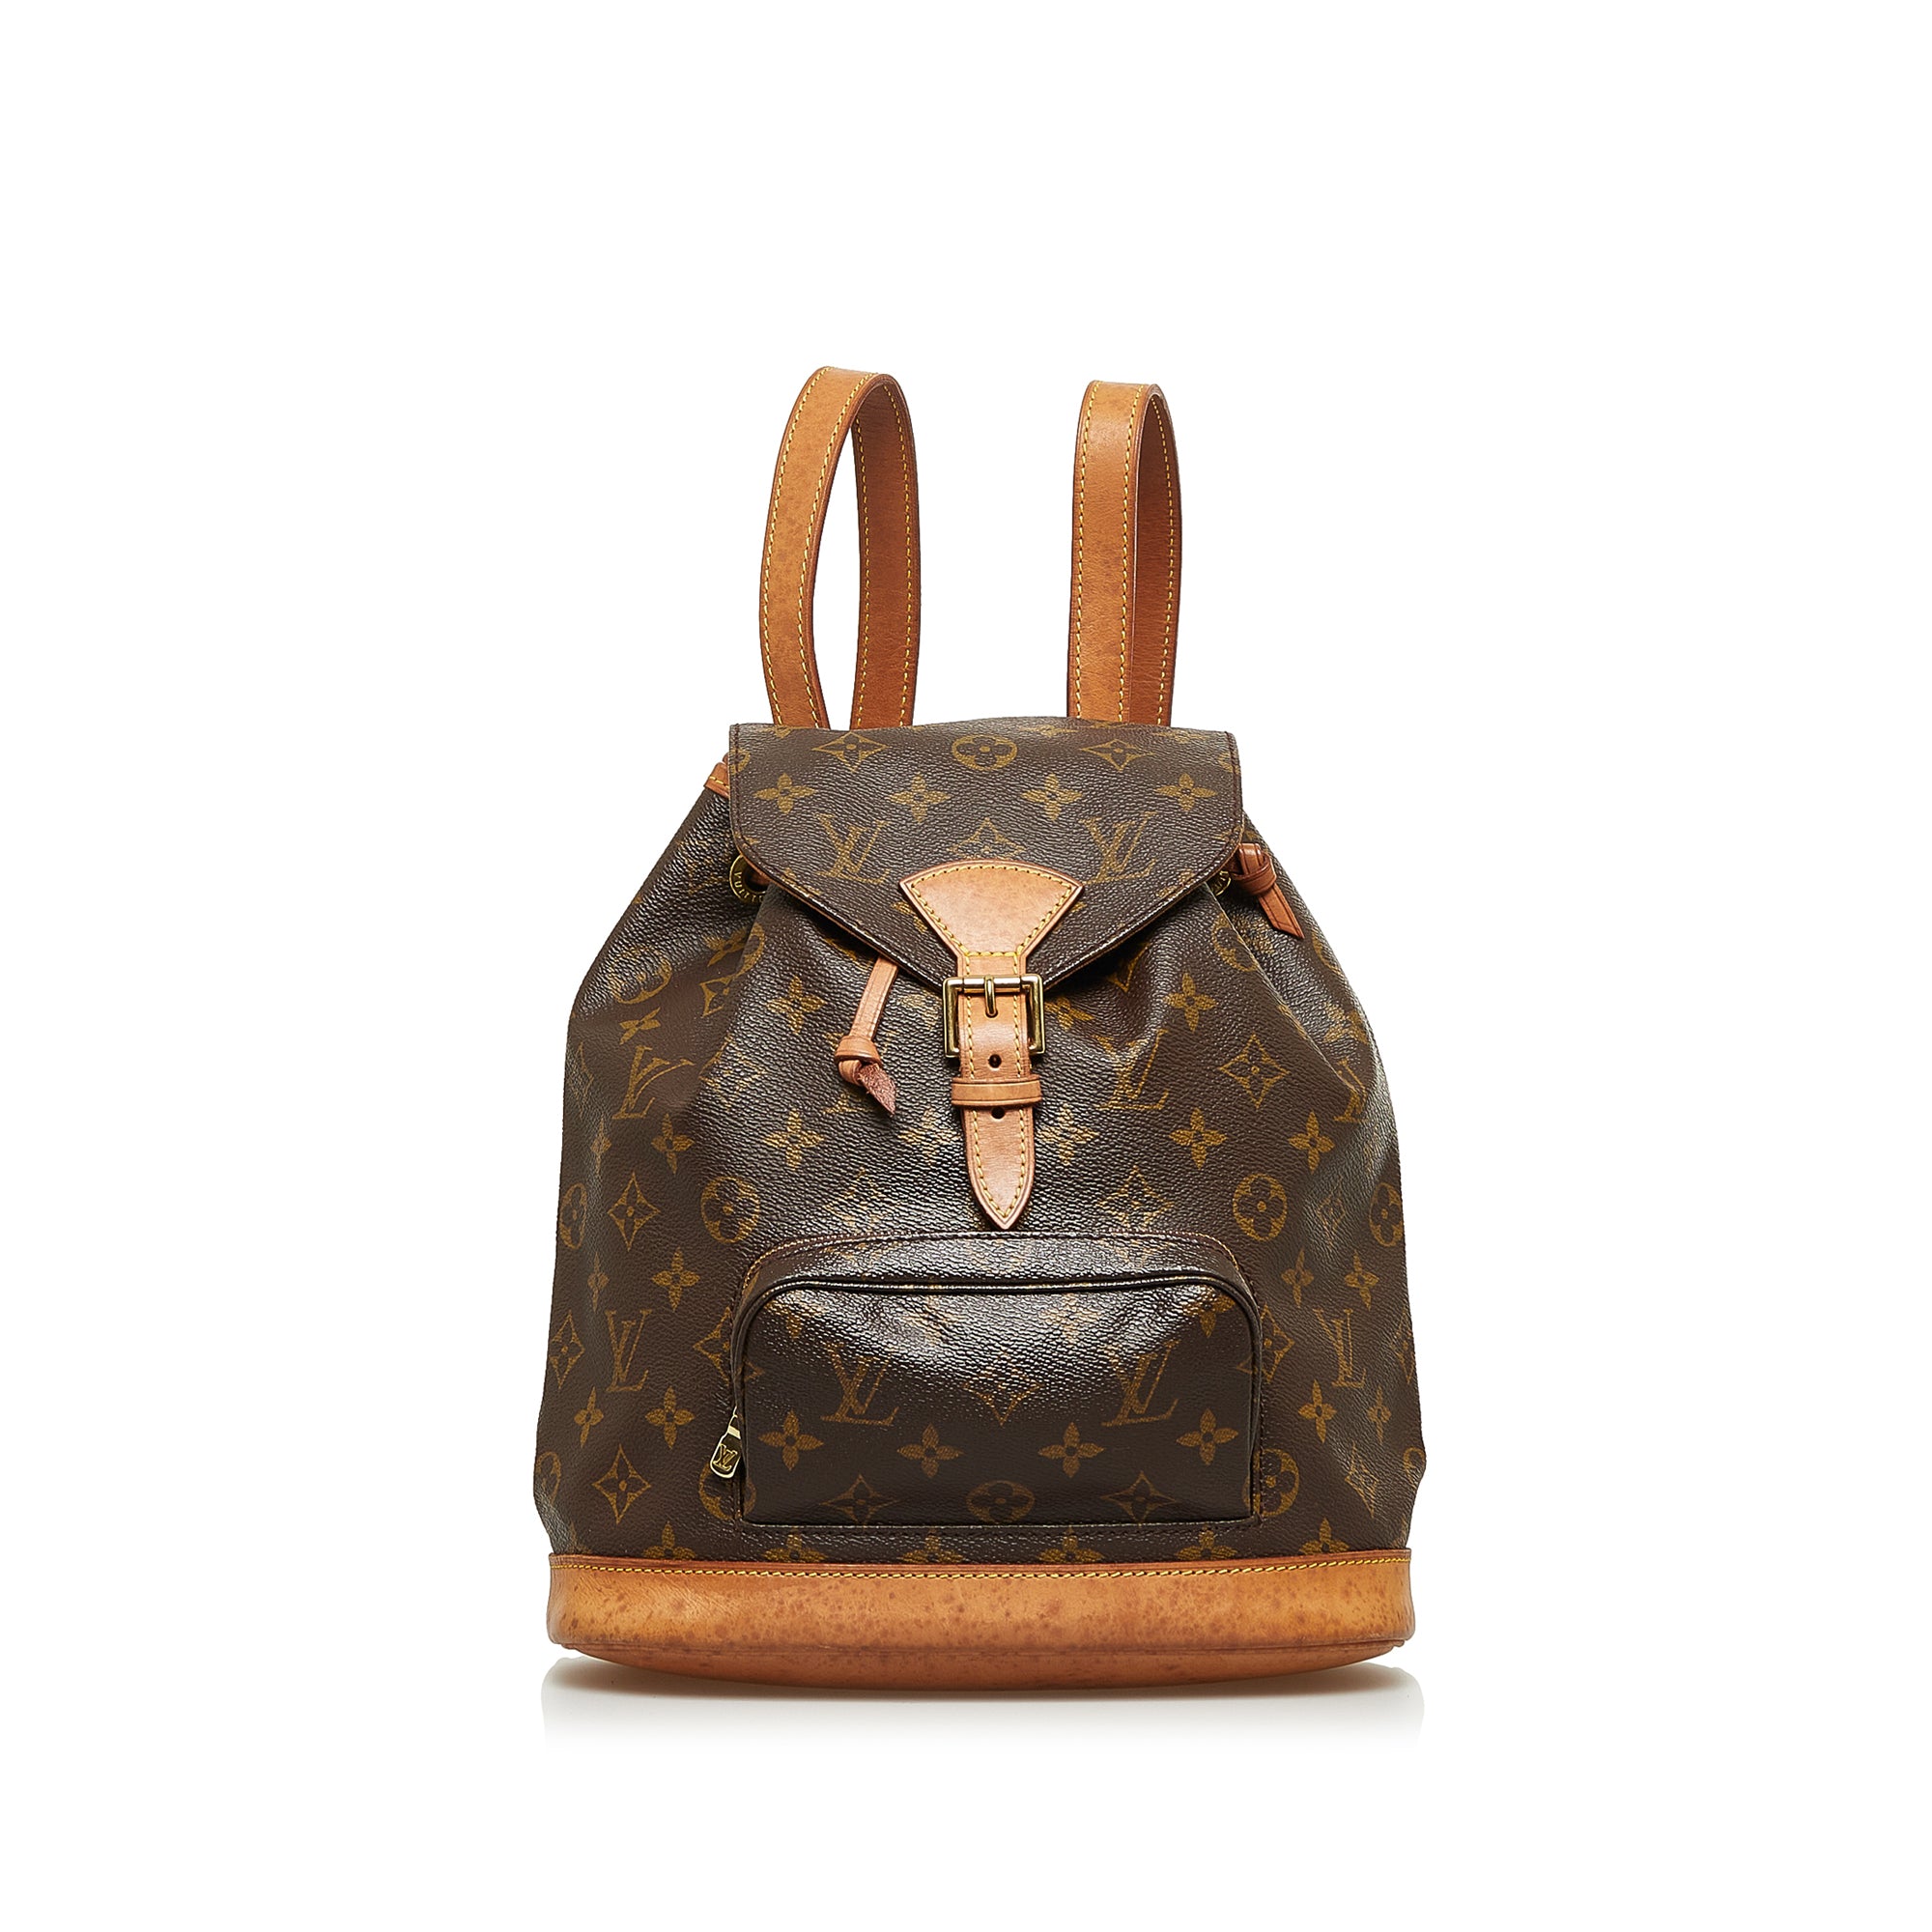 Montsouris Pm Backpack (Authentic Pre-Owned) – The Lady Bag